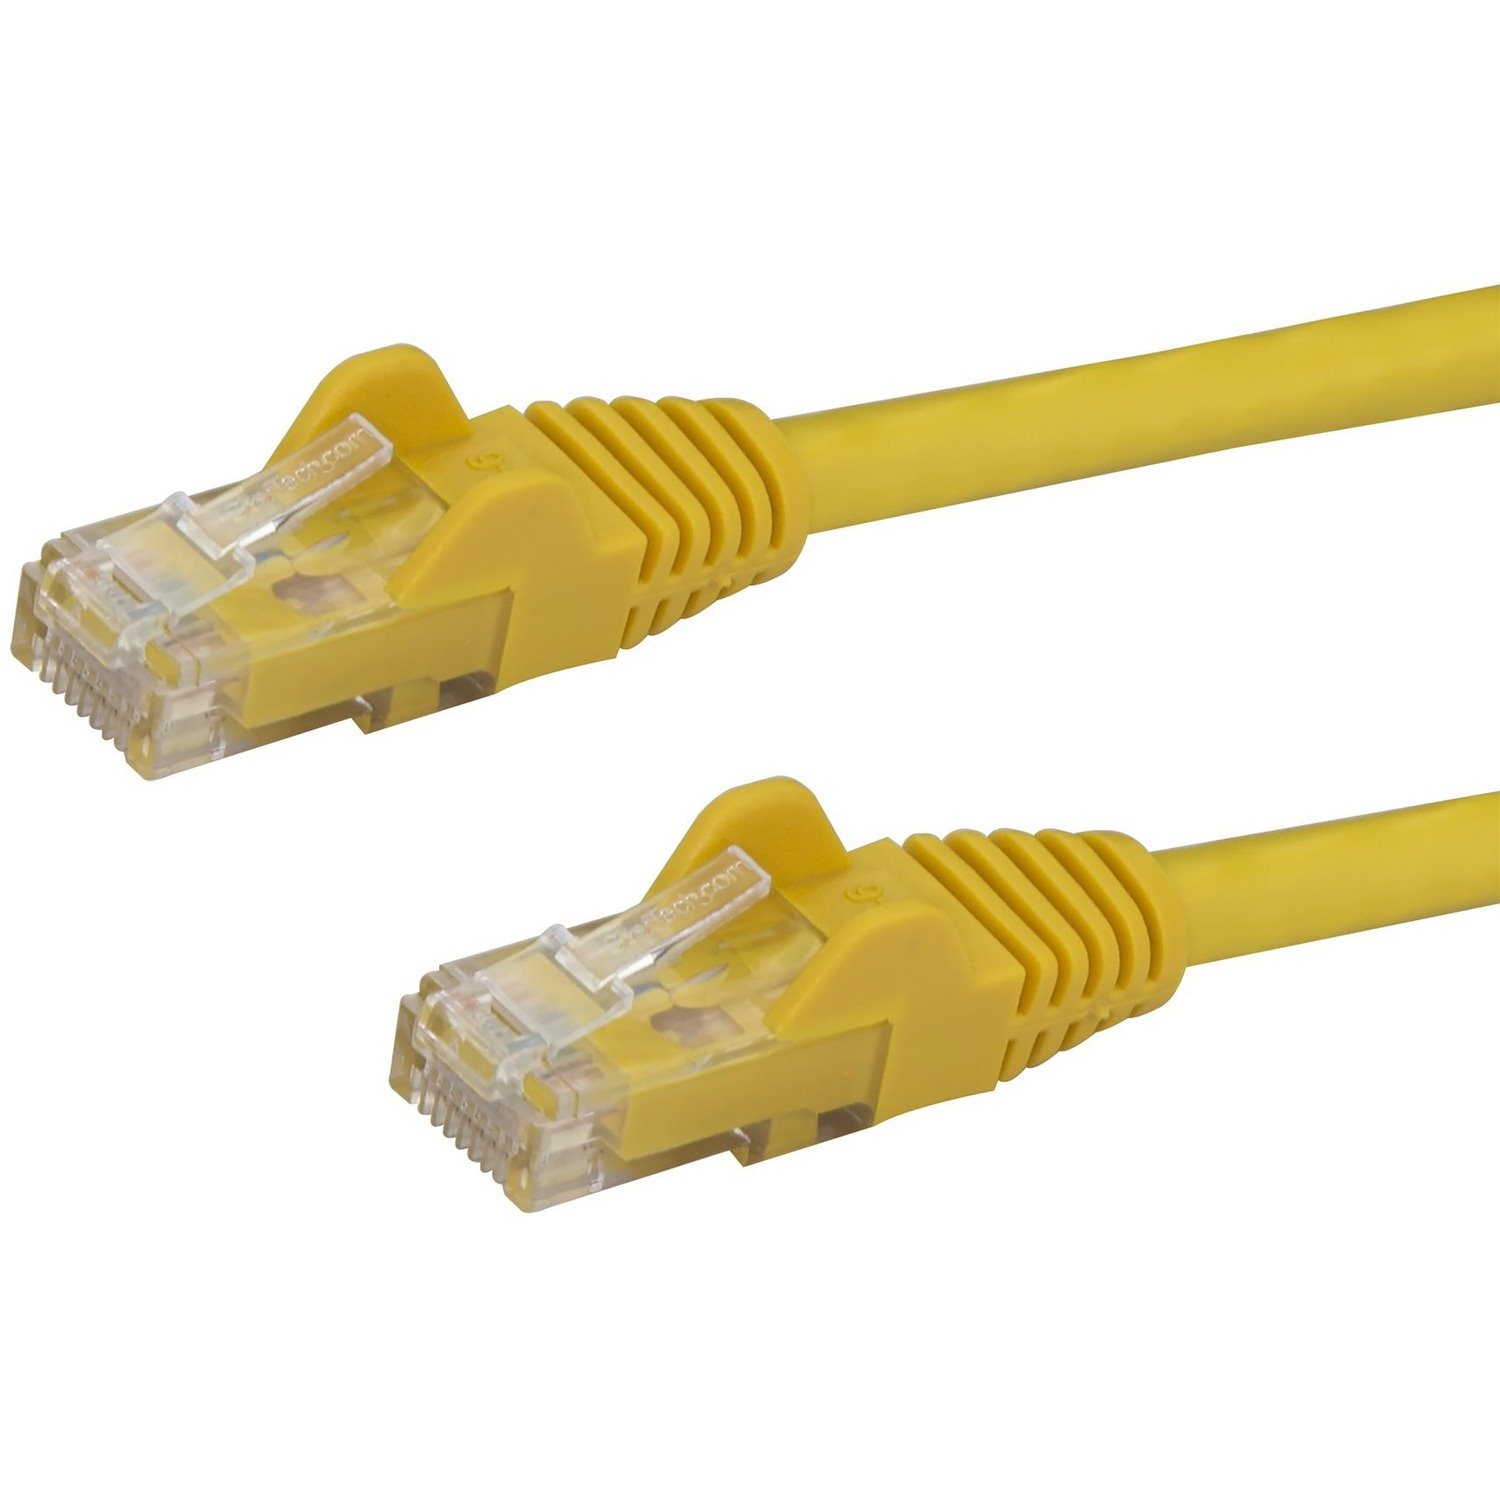 StarTech.com 7 m Category 6 Network Cable for Network Device - 1